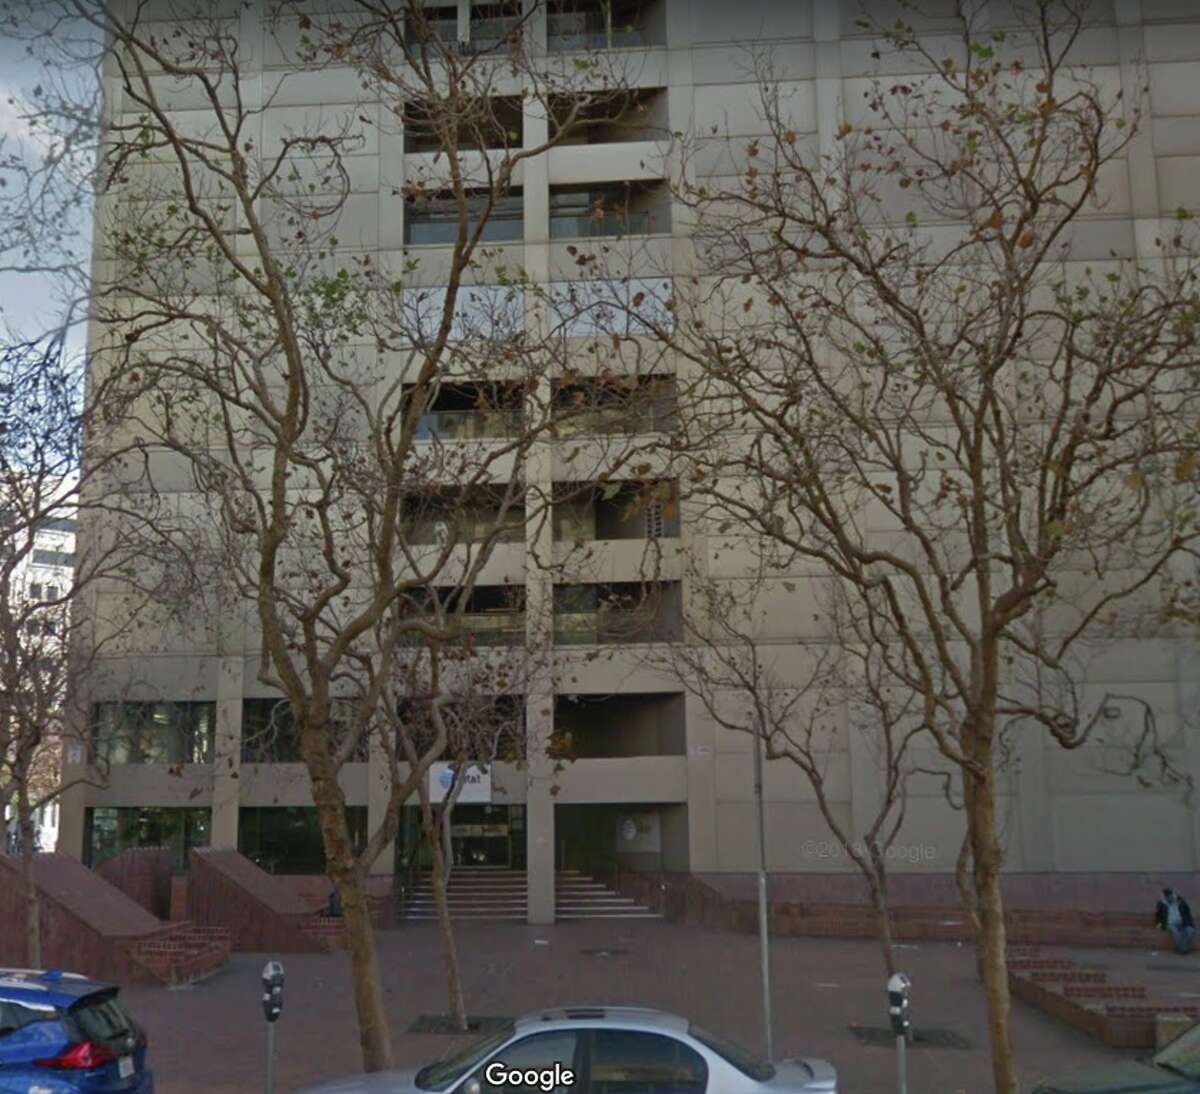 Google Map images of 611 Folsom Street in San Francisco, the alleged location of NSA spying operations.